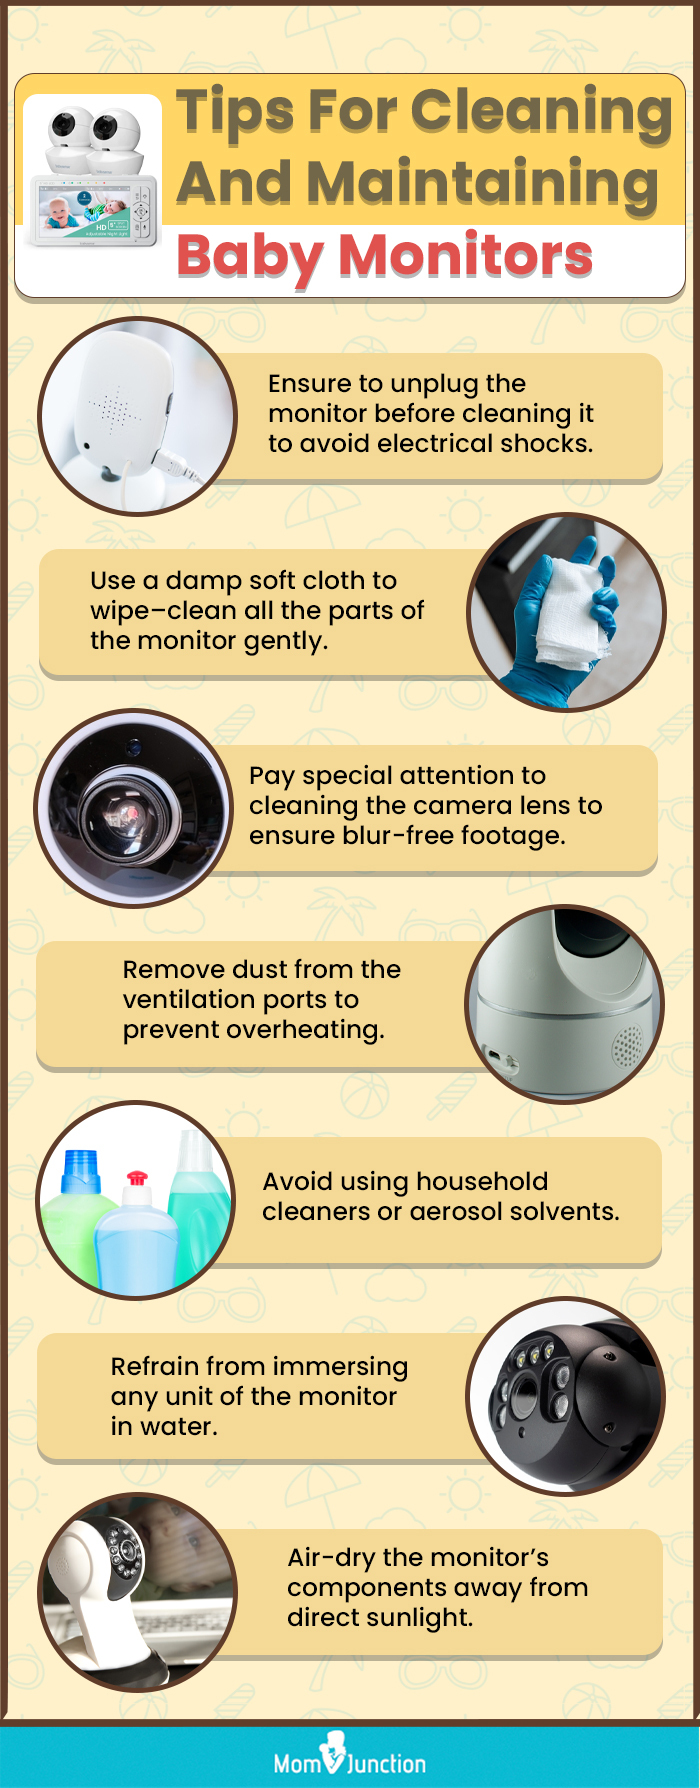 Tips For Cleaning And Maintaining Baby Monitors (infographic)